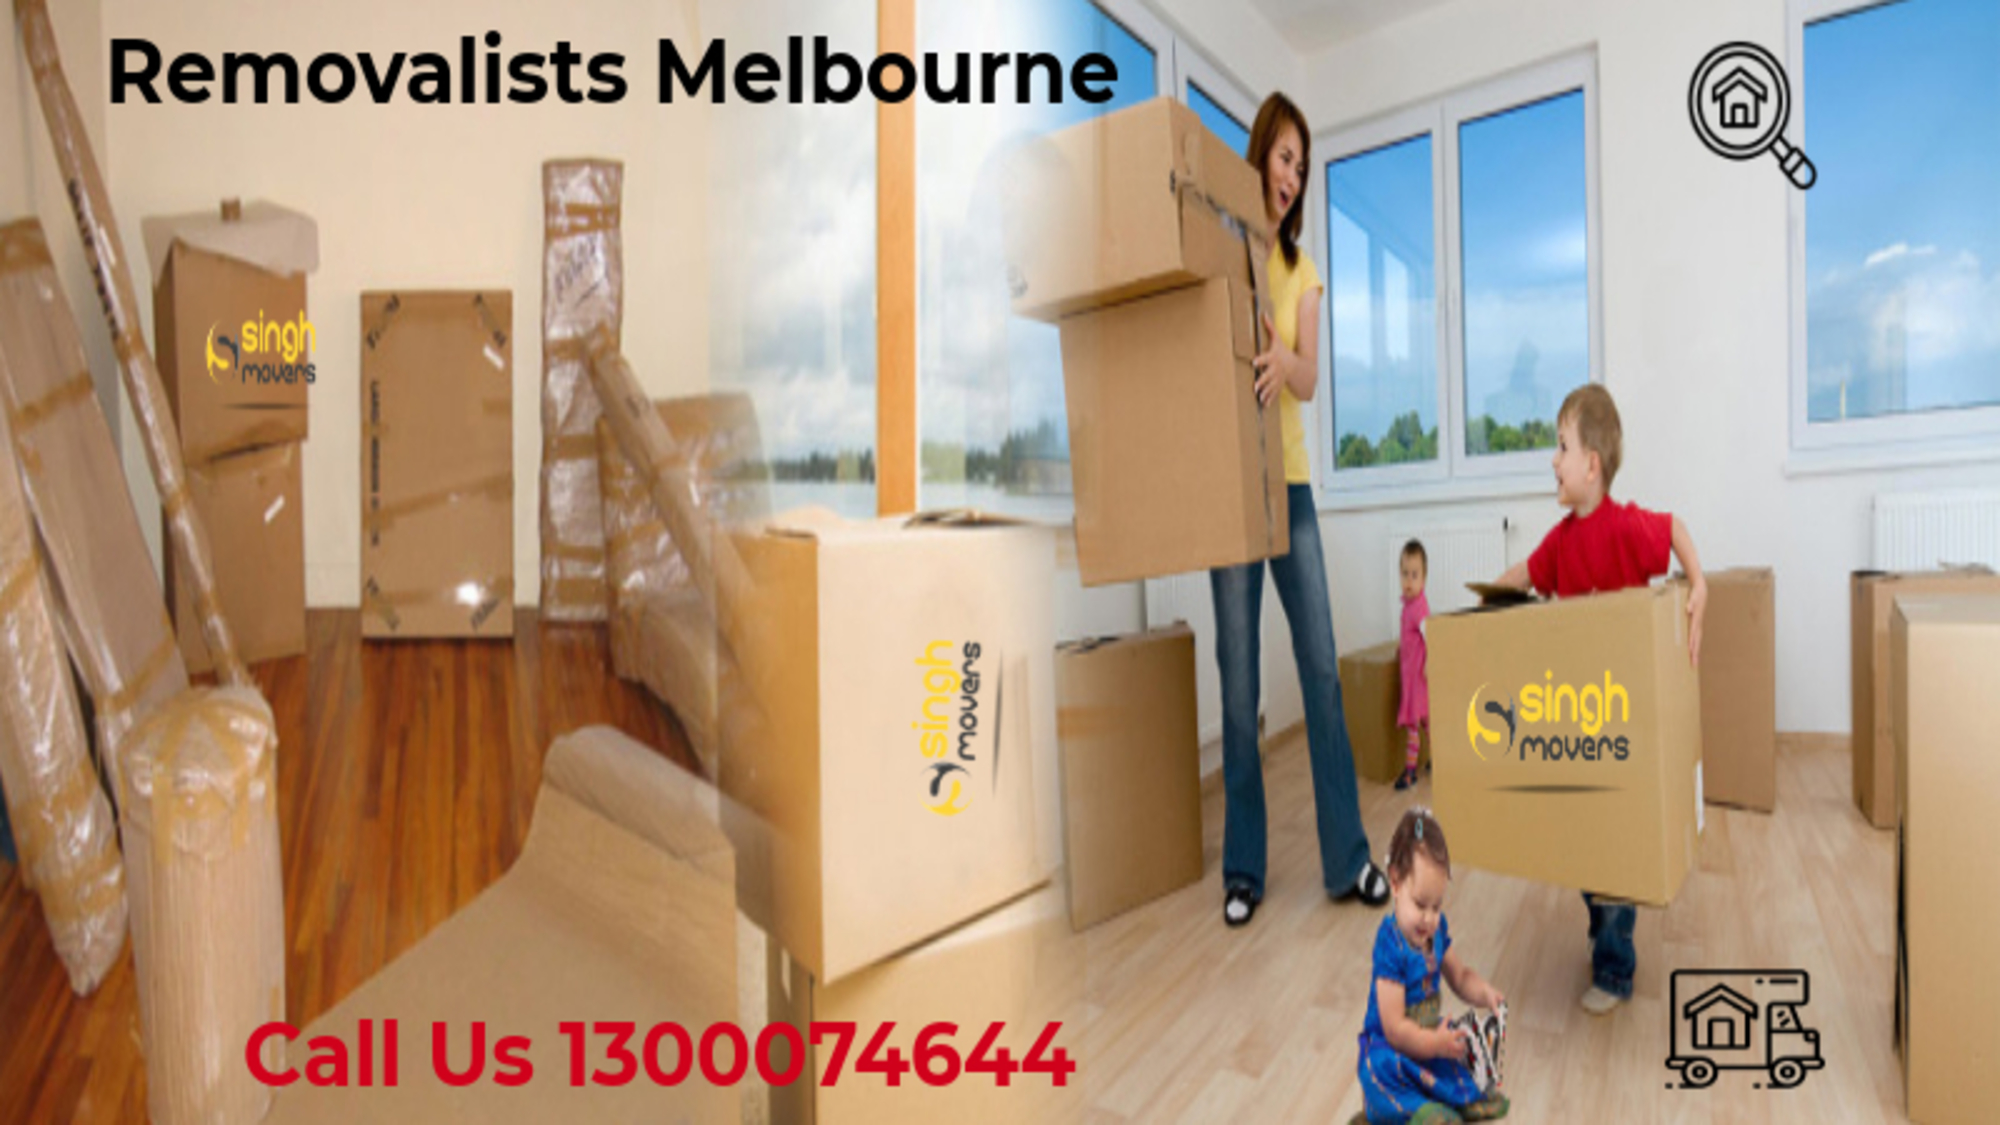 removalists melbourne, removalists, melbourne